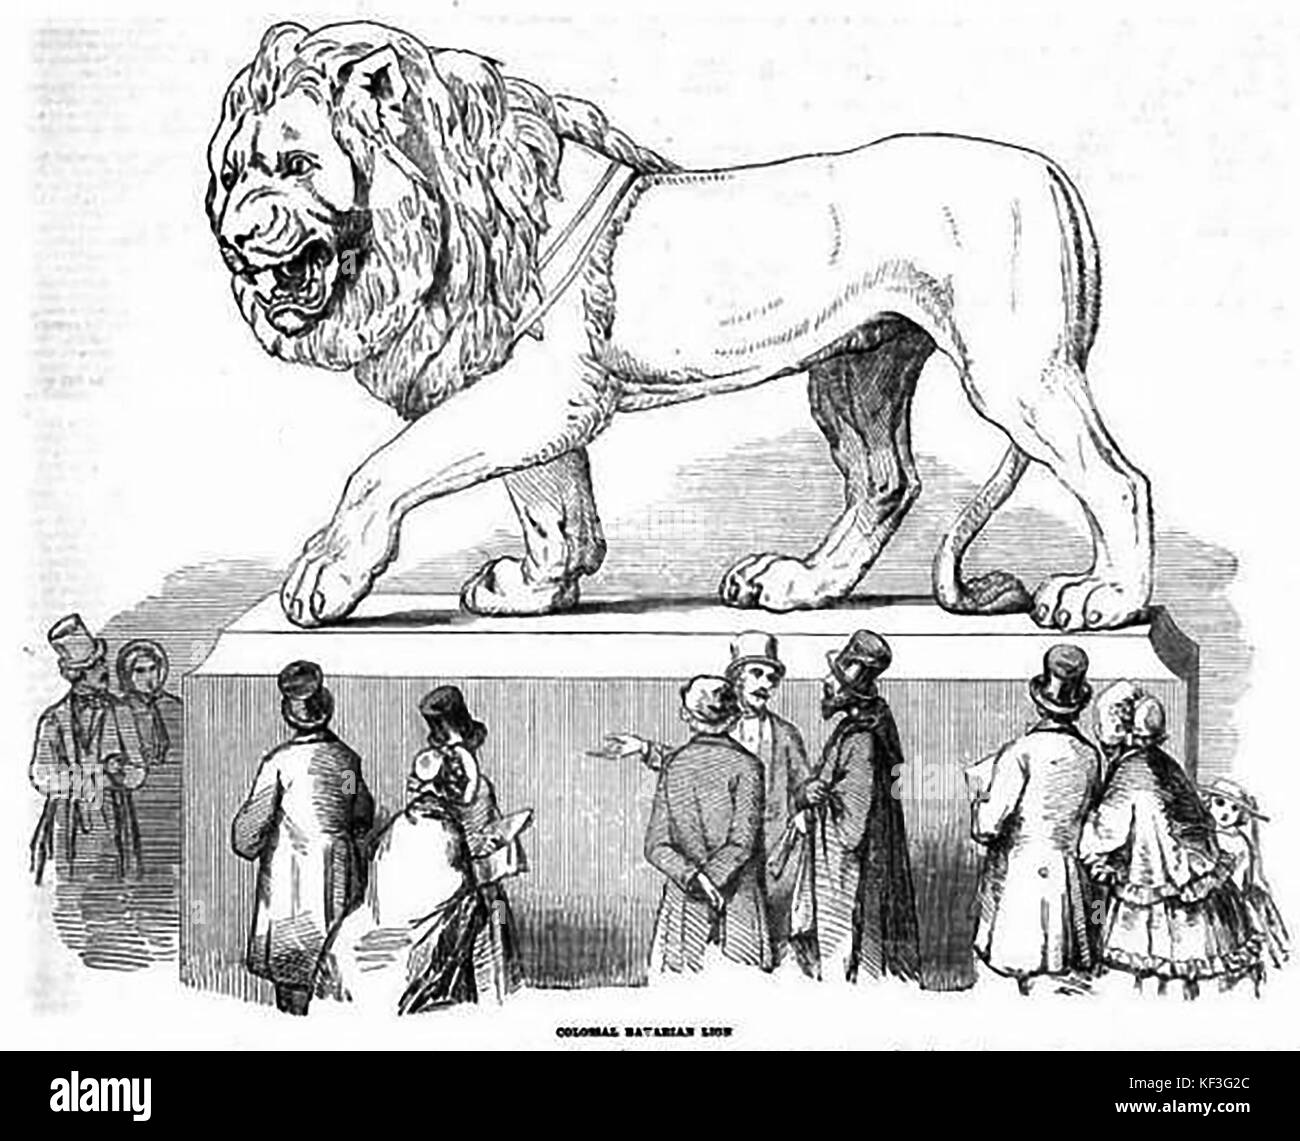 1851 Great Exhibition at Crystal Palace. London - The Colossal Bavarian lion by Muller - Size 15 feet by 9 feet, cast in one piece Stock Photo